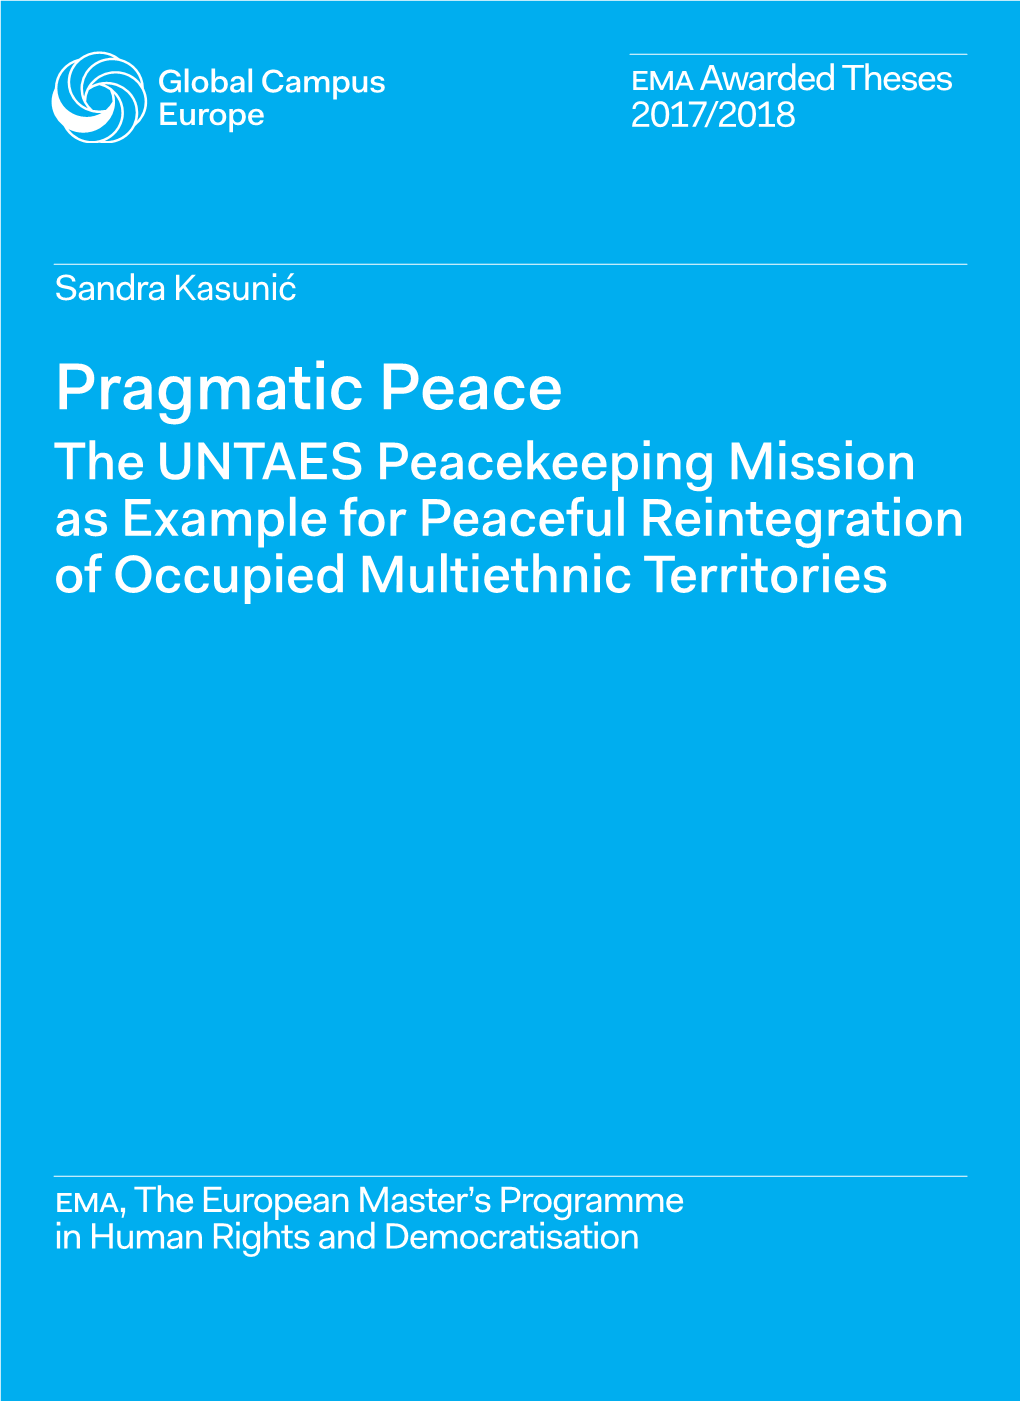 Pragmatic Peace the UNTAES Peacekeeping Mission As Example for Peaceful Reintegration of Occupied Multiethnic Territories